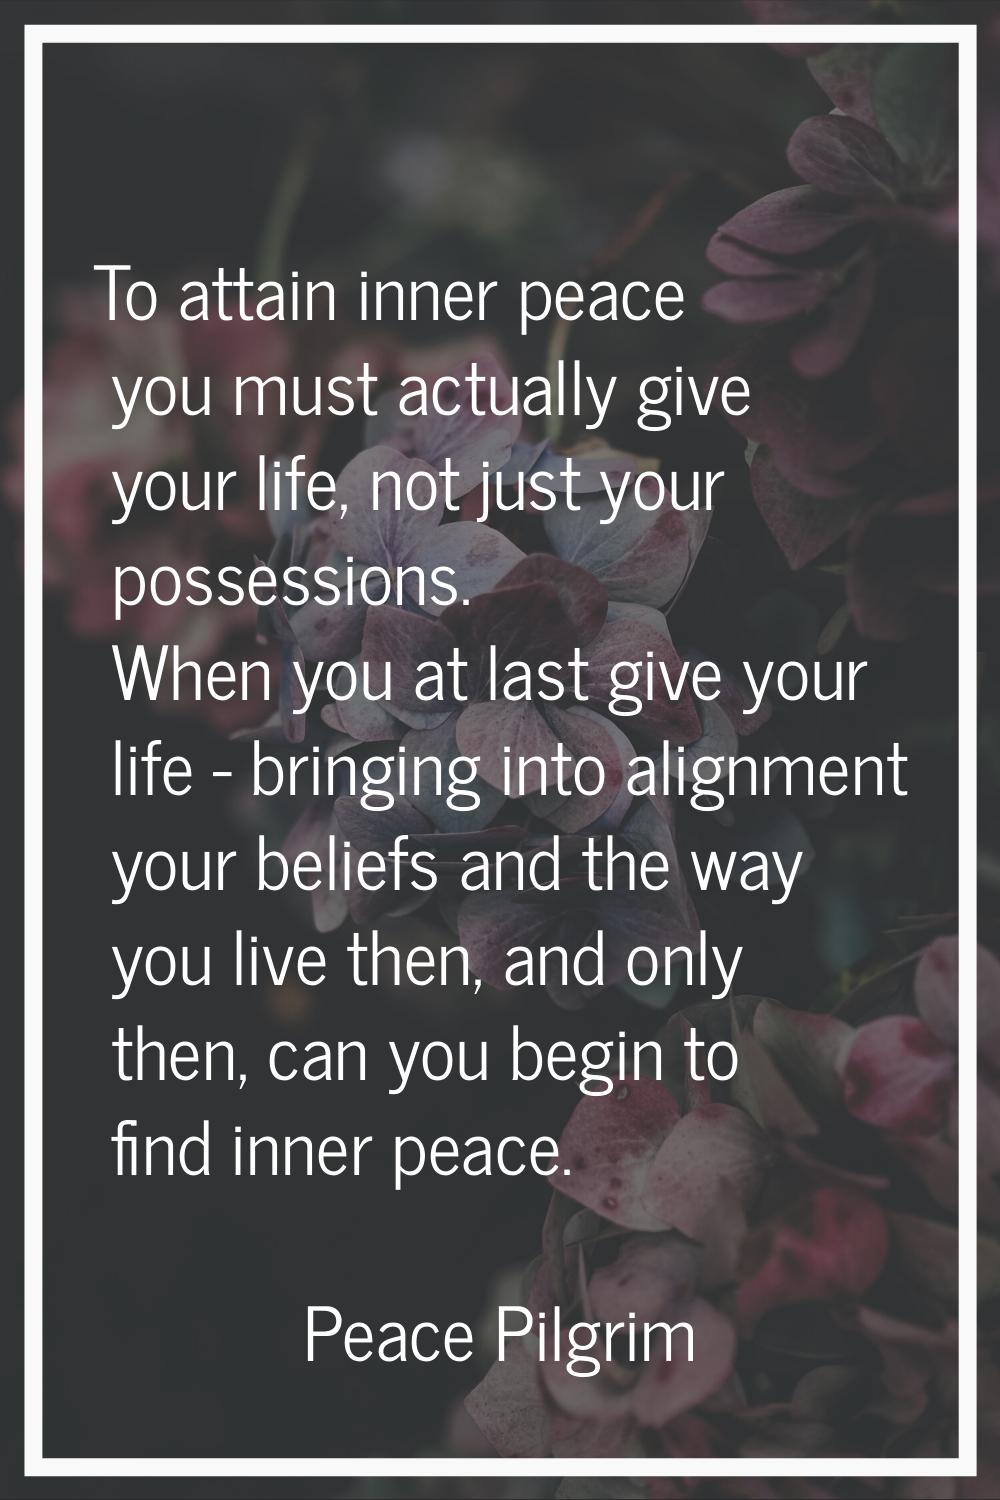 To attain inner peace you must actually give your life, not just your possessions. When you at last